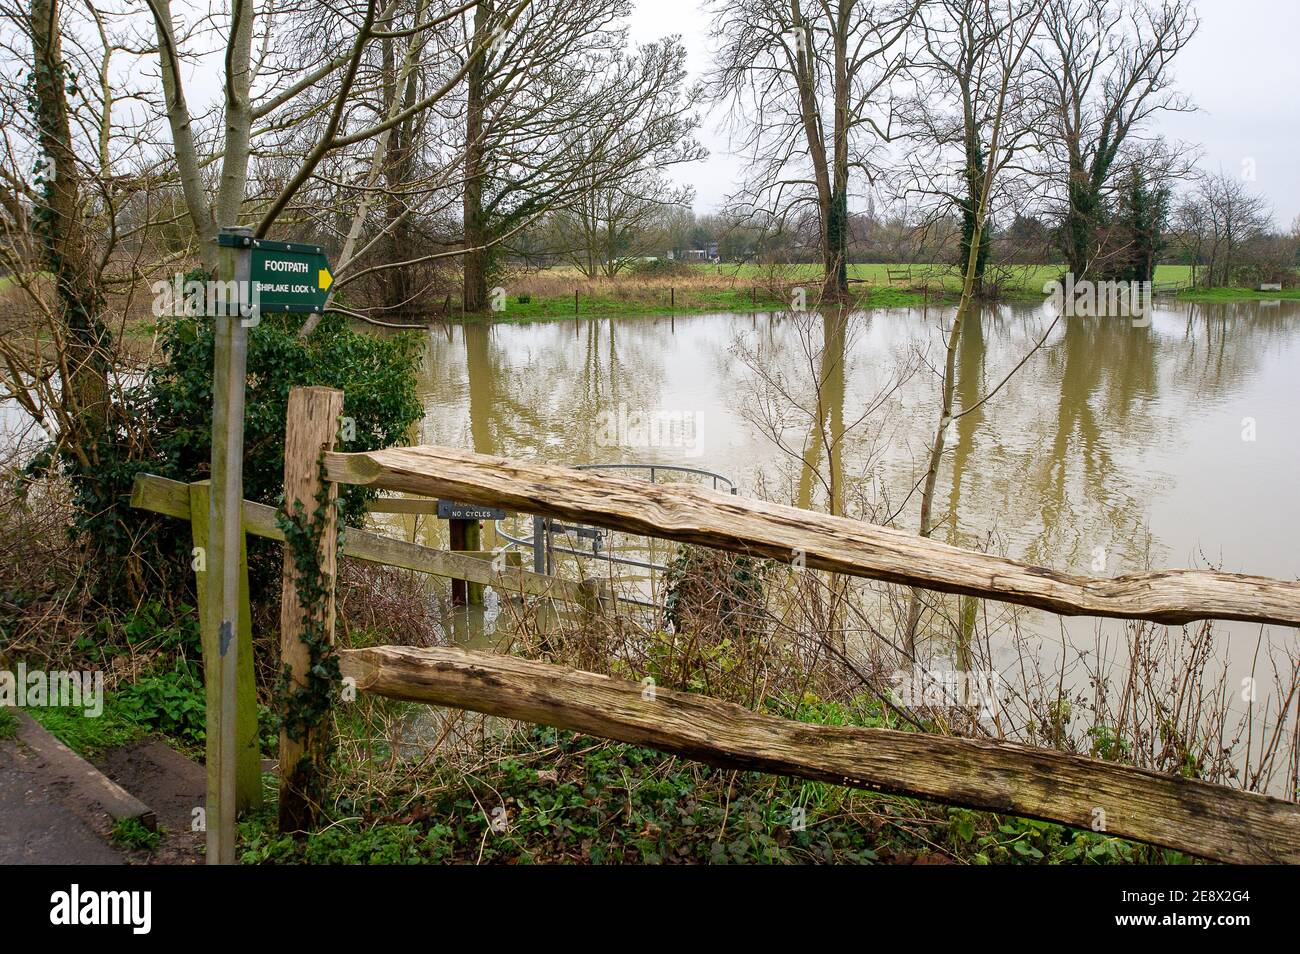 Lower Shiplake, Oxfordshire, UK - 1st February, 2021. An impassable part of the Thames Path in Lower Shiplake. A Flood Warning is in place for Shiplake and Lower Shiplake. Property flooding is expected as river levels continue to rise on the River Thames. Further rainfall is forecast for the week ahead. Credit: Maureen McLean/Alamy Live News Stock Photo